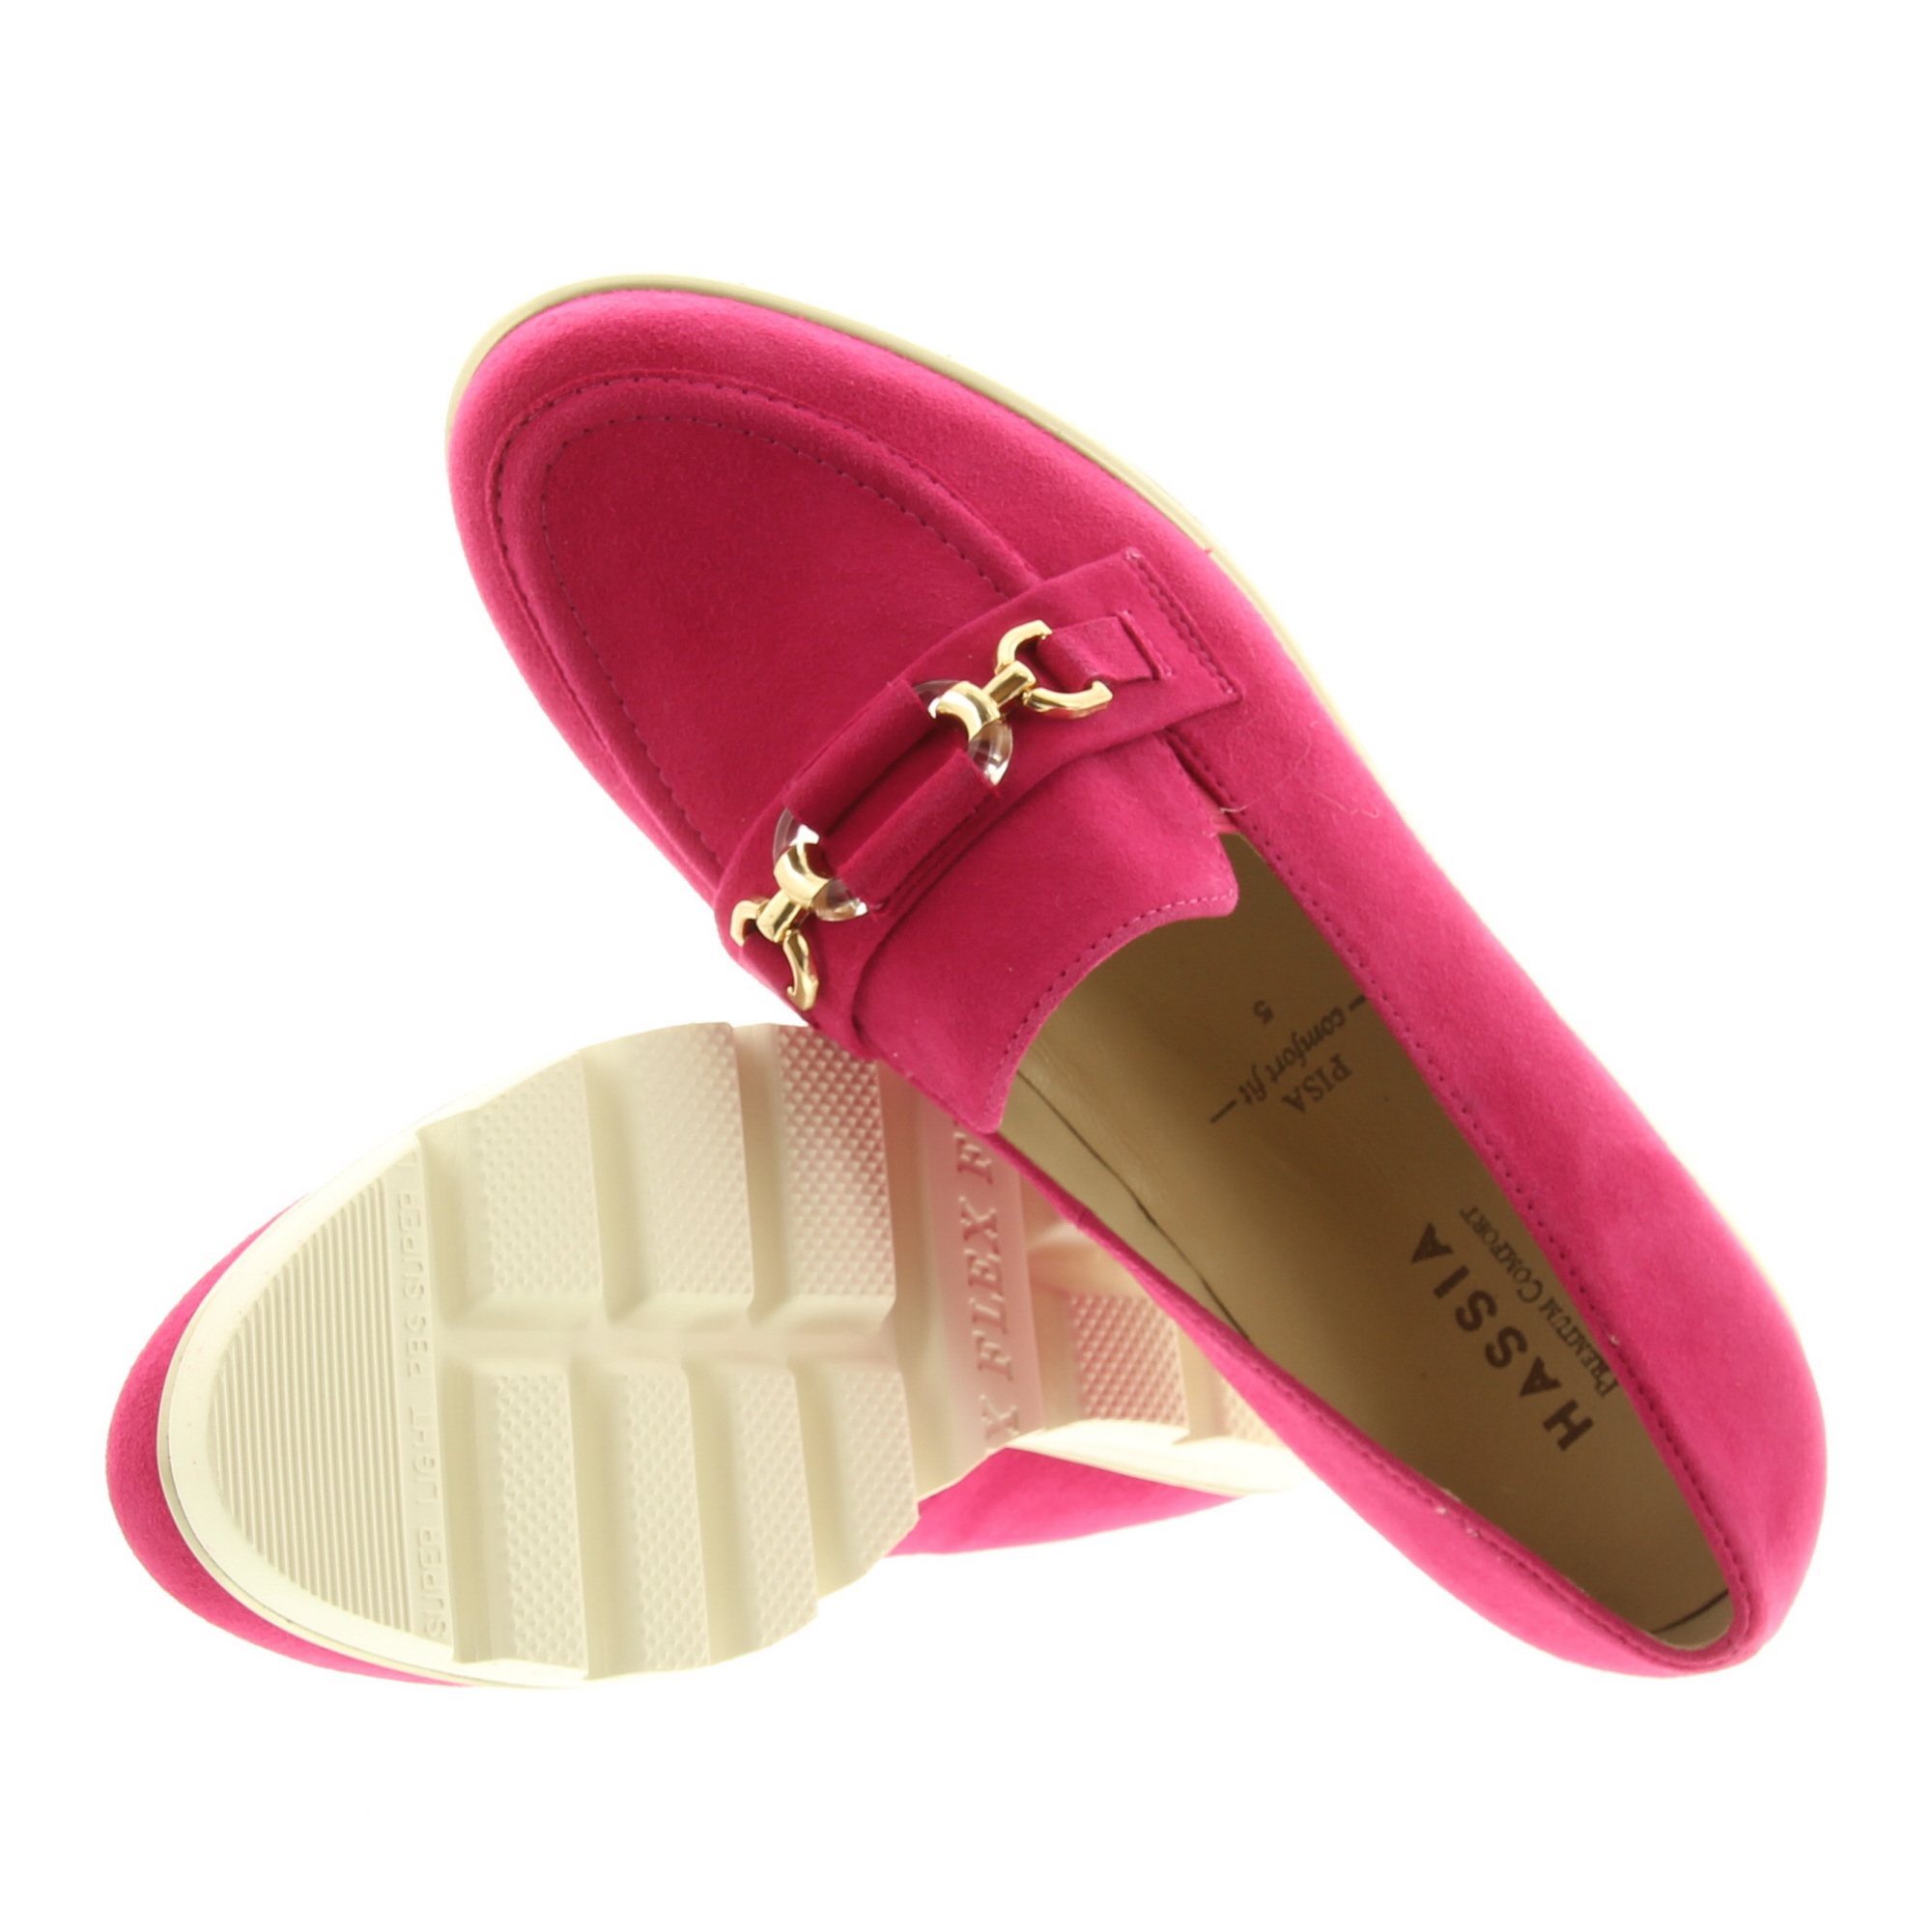 Hassia Shoes 301552 Pisa 4300 Pink